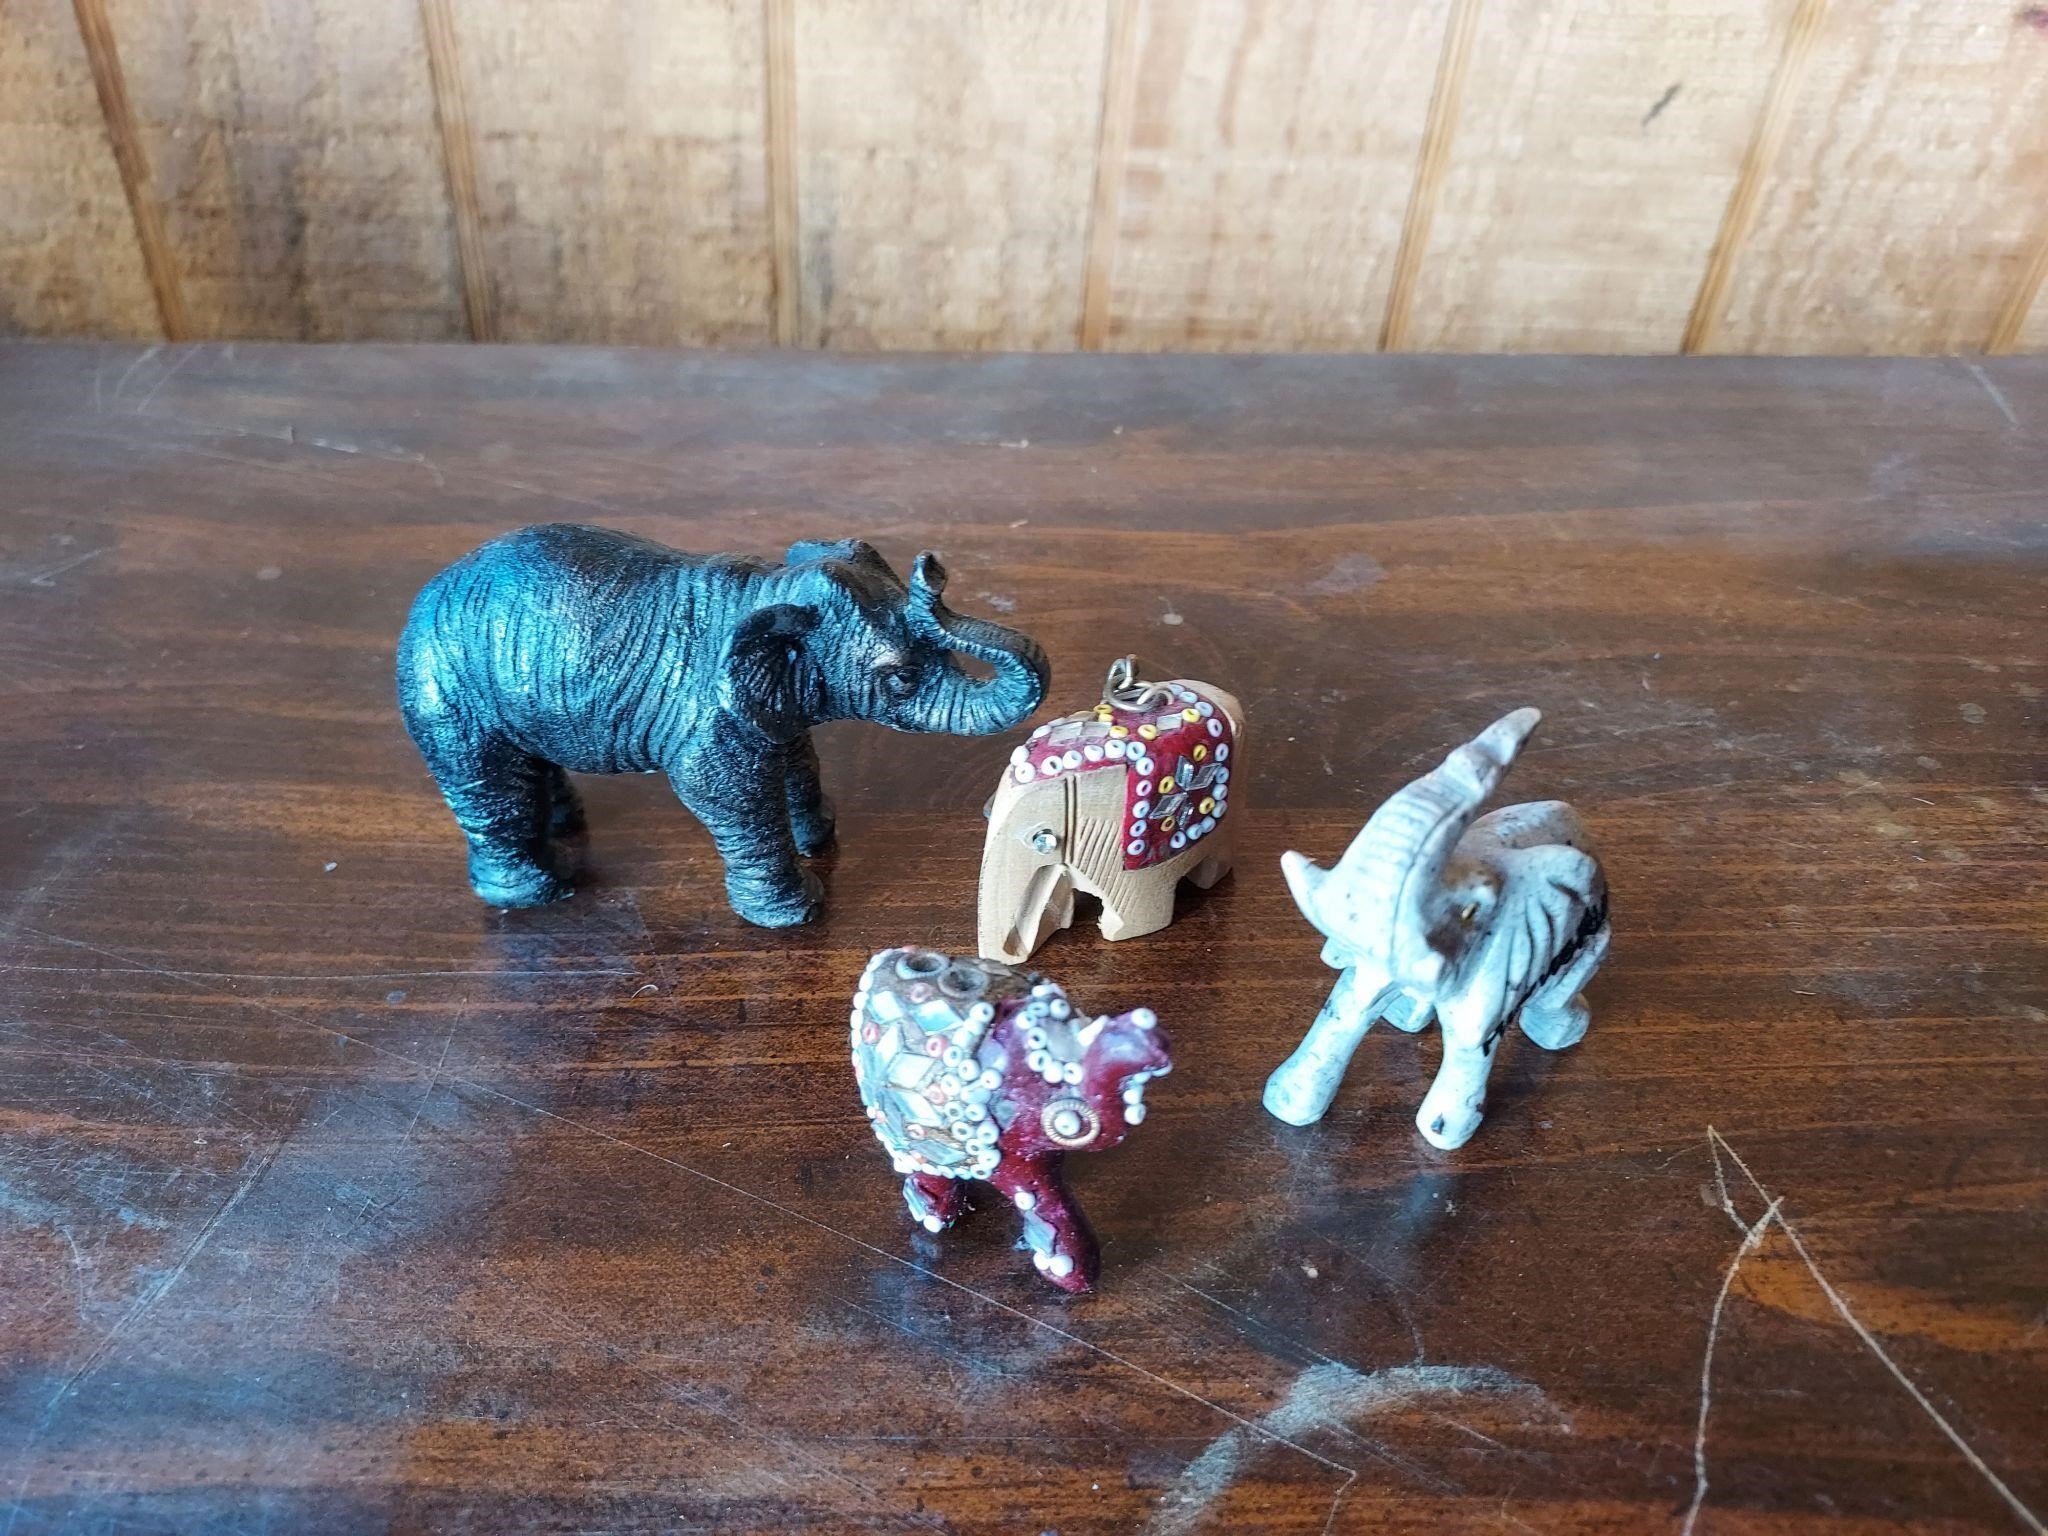 Lot of different designs and material elephants